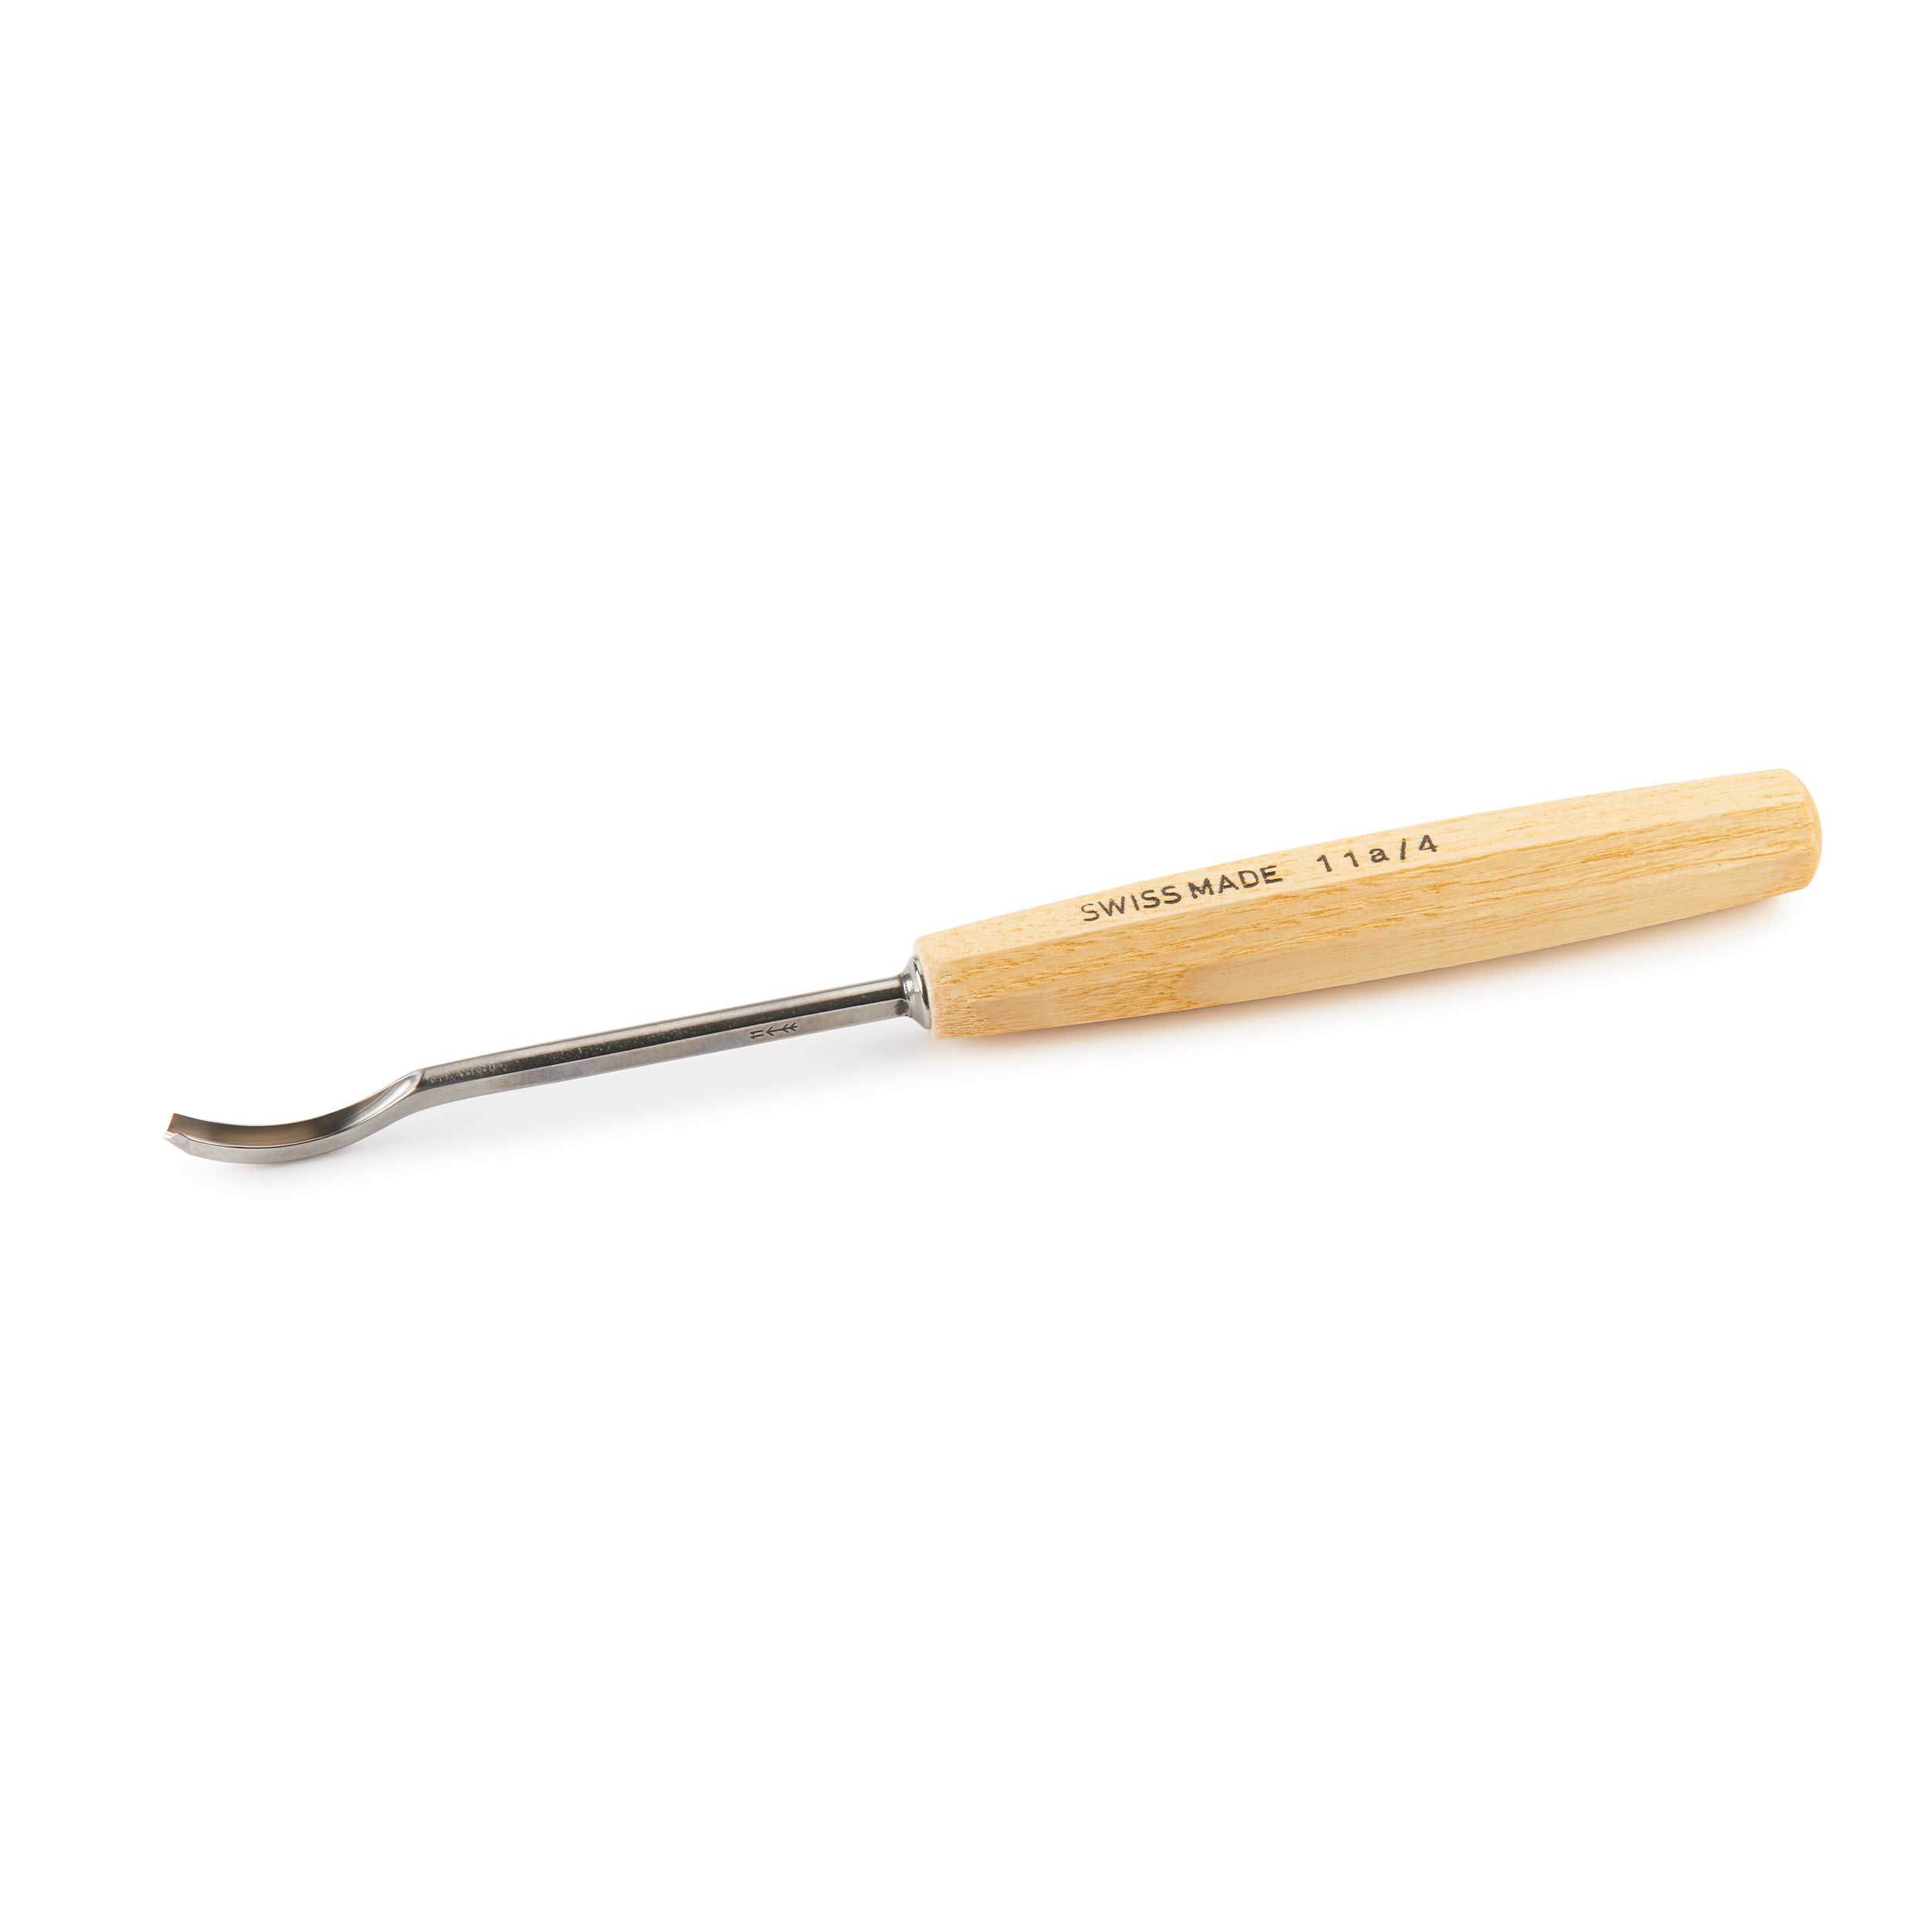 #11 Sweep Spoon Gouge 4 Mm, Full Size